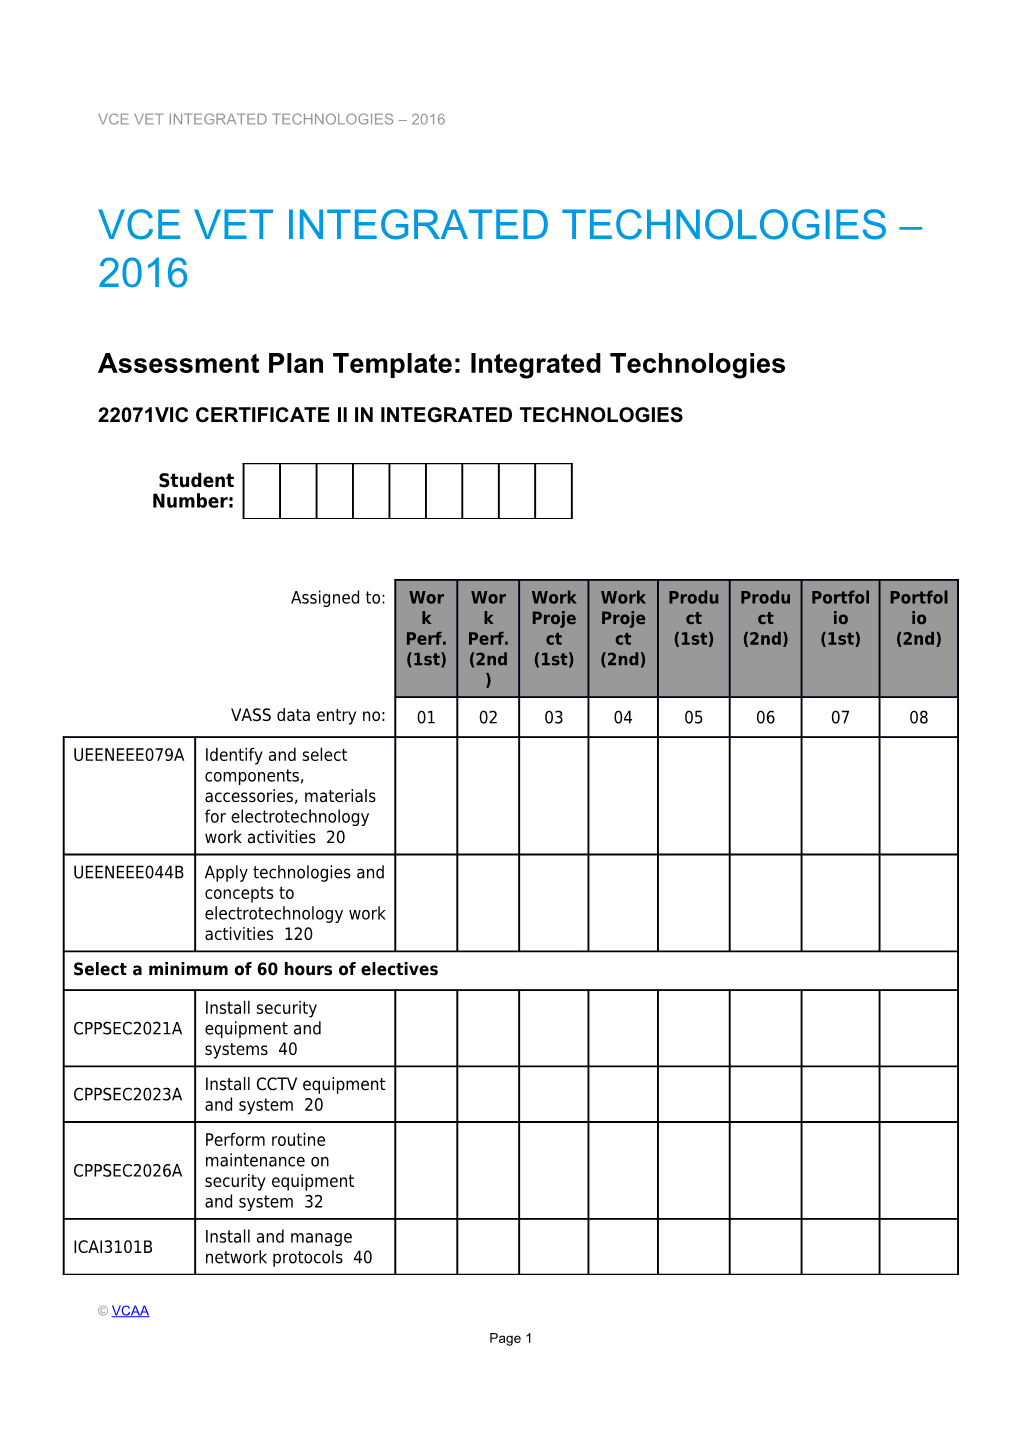 VCE VET Integrated Technologies Assessment Plan Template and Sample